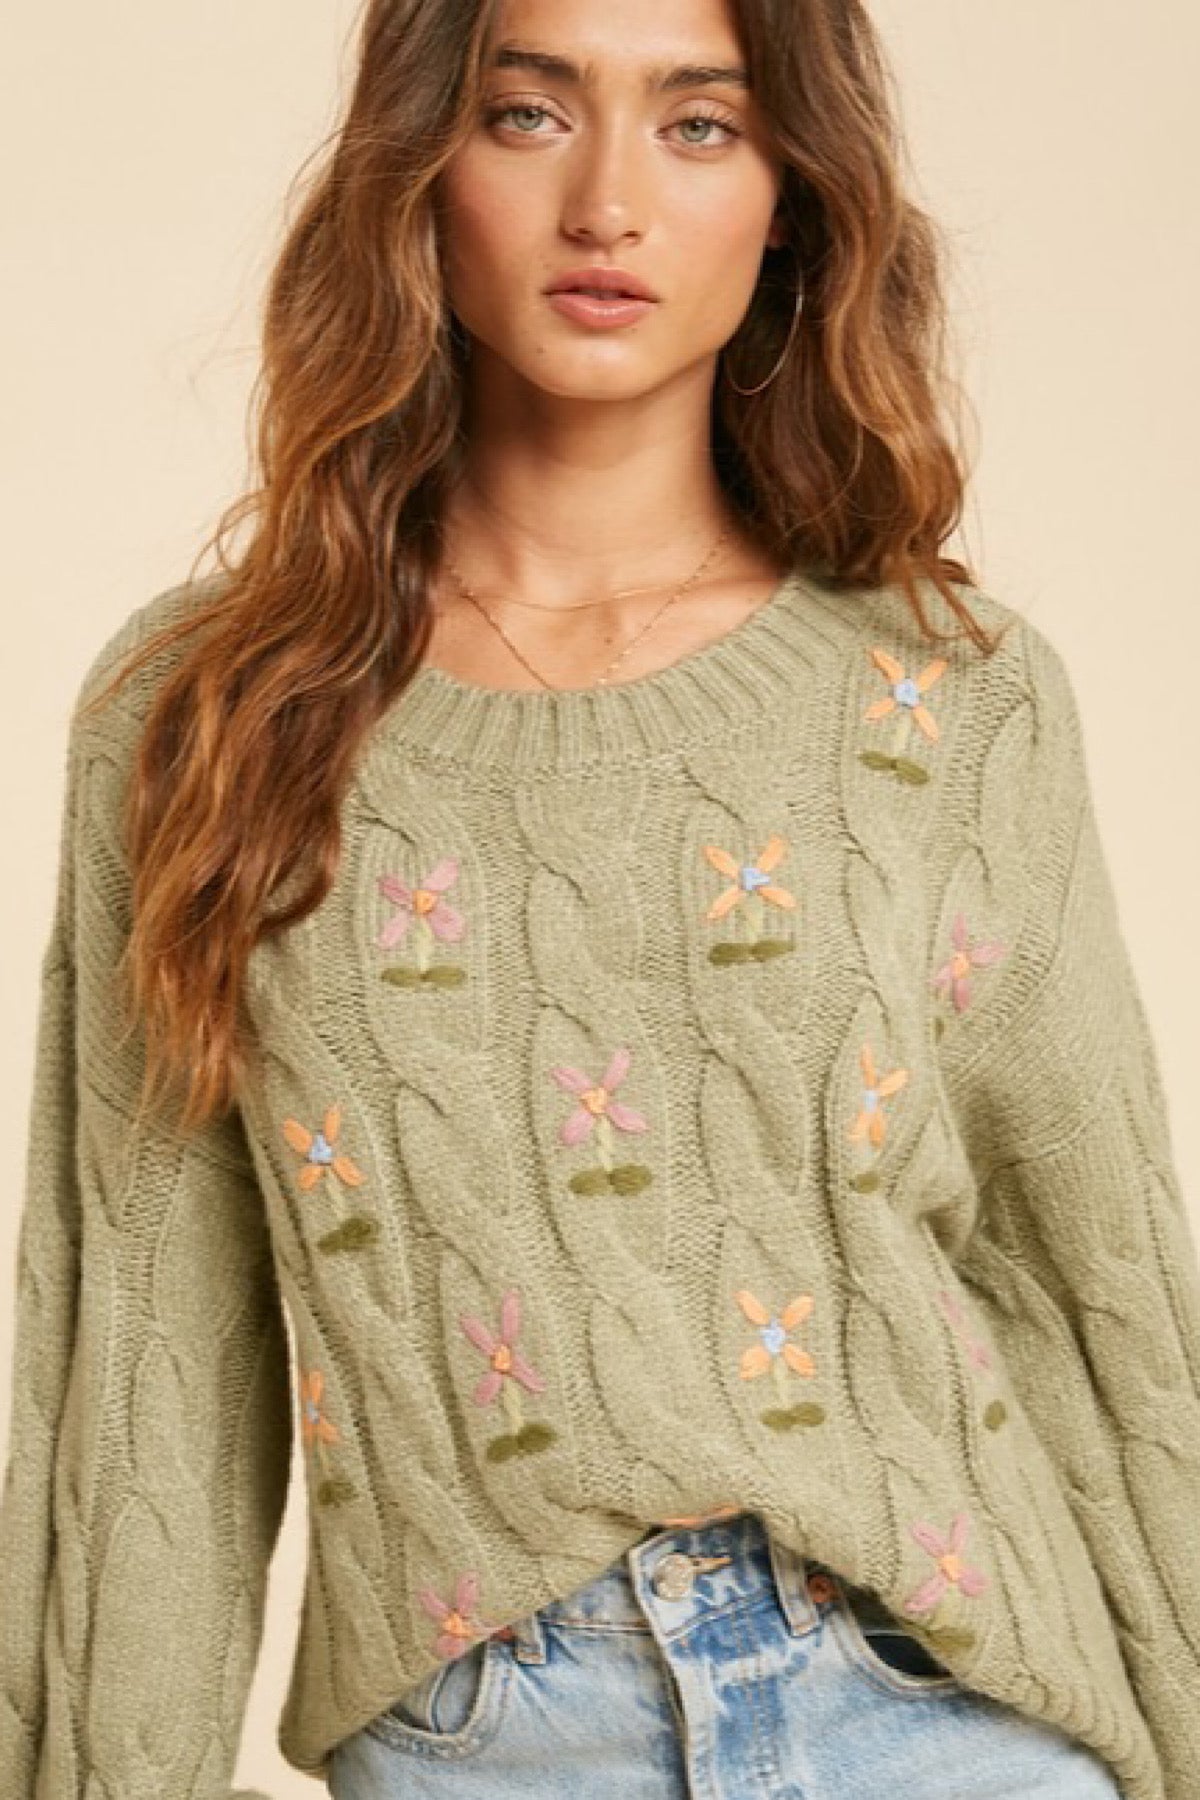 Julia Embroidered Cable Knit Sweater